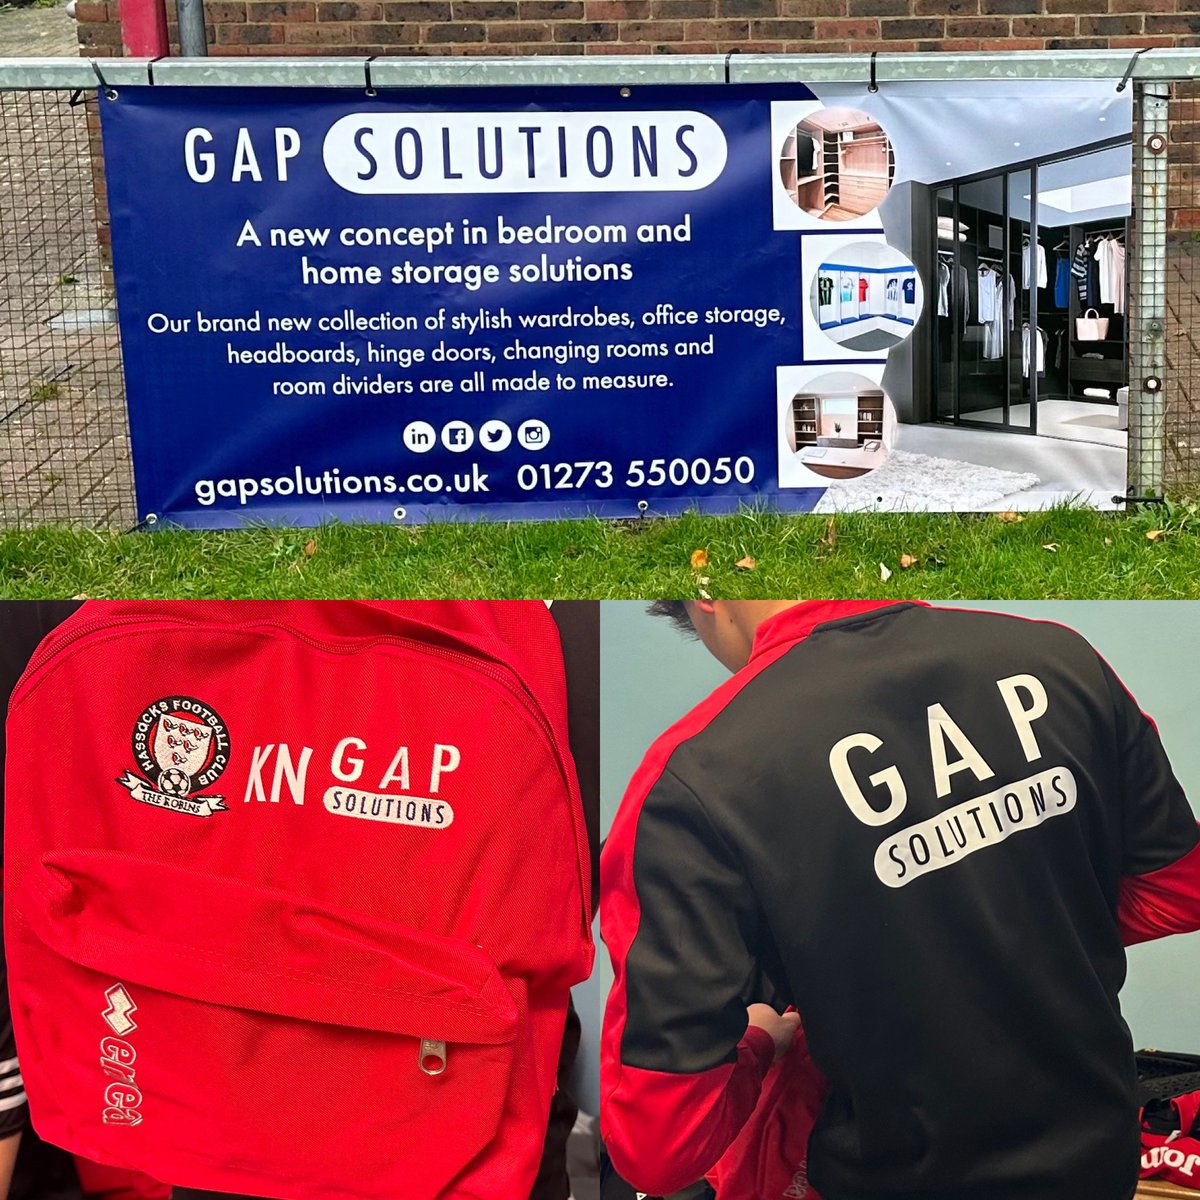 With today being the U18s final game of the season, it’s an opportune moment to thank Gap Solutions @gapsolutions_ for their support this season, sponsoring tracksuits and rucksacks for the boys this season